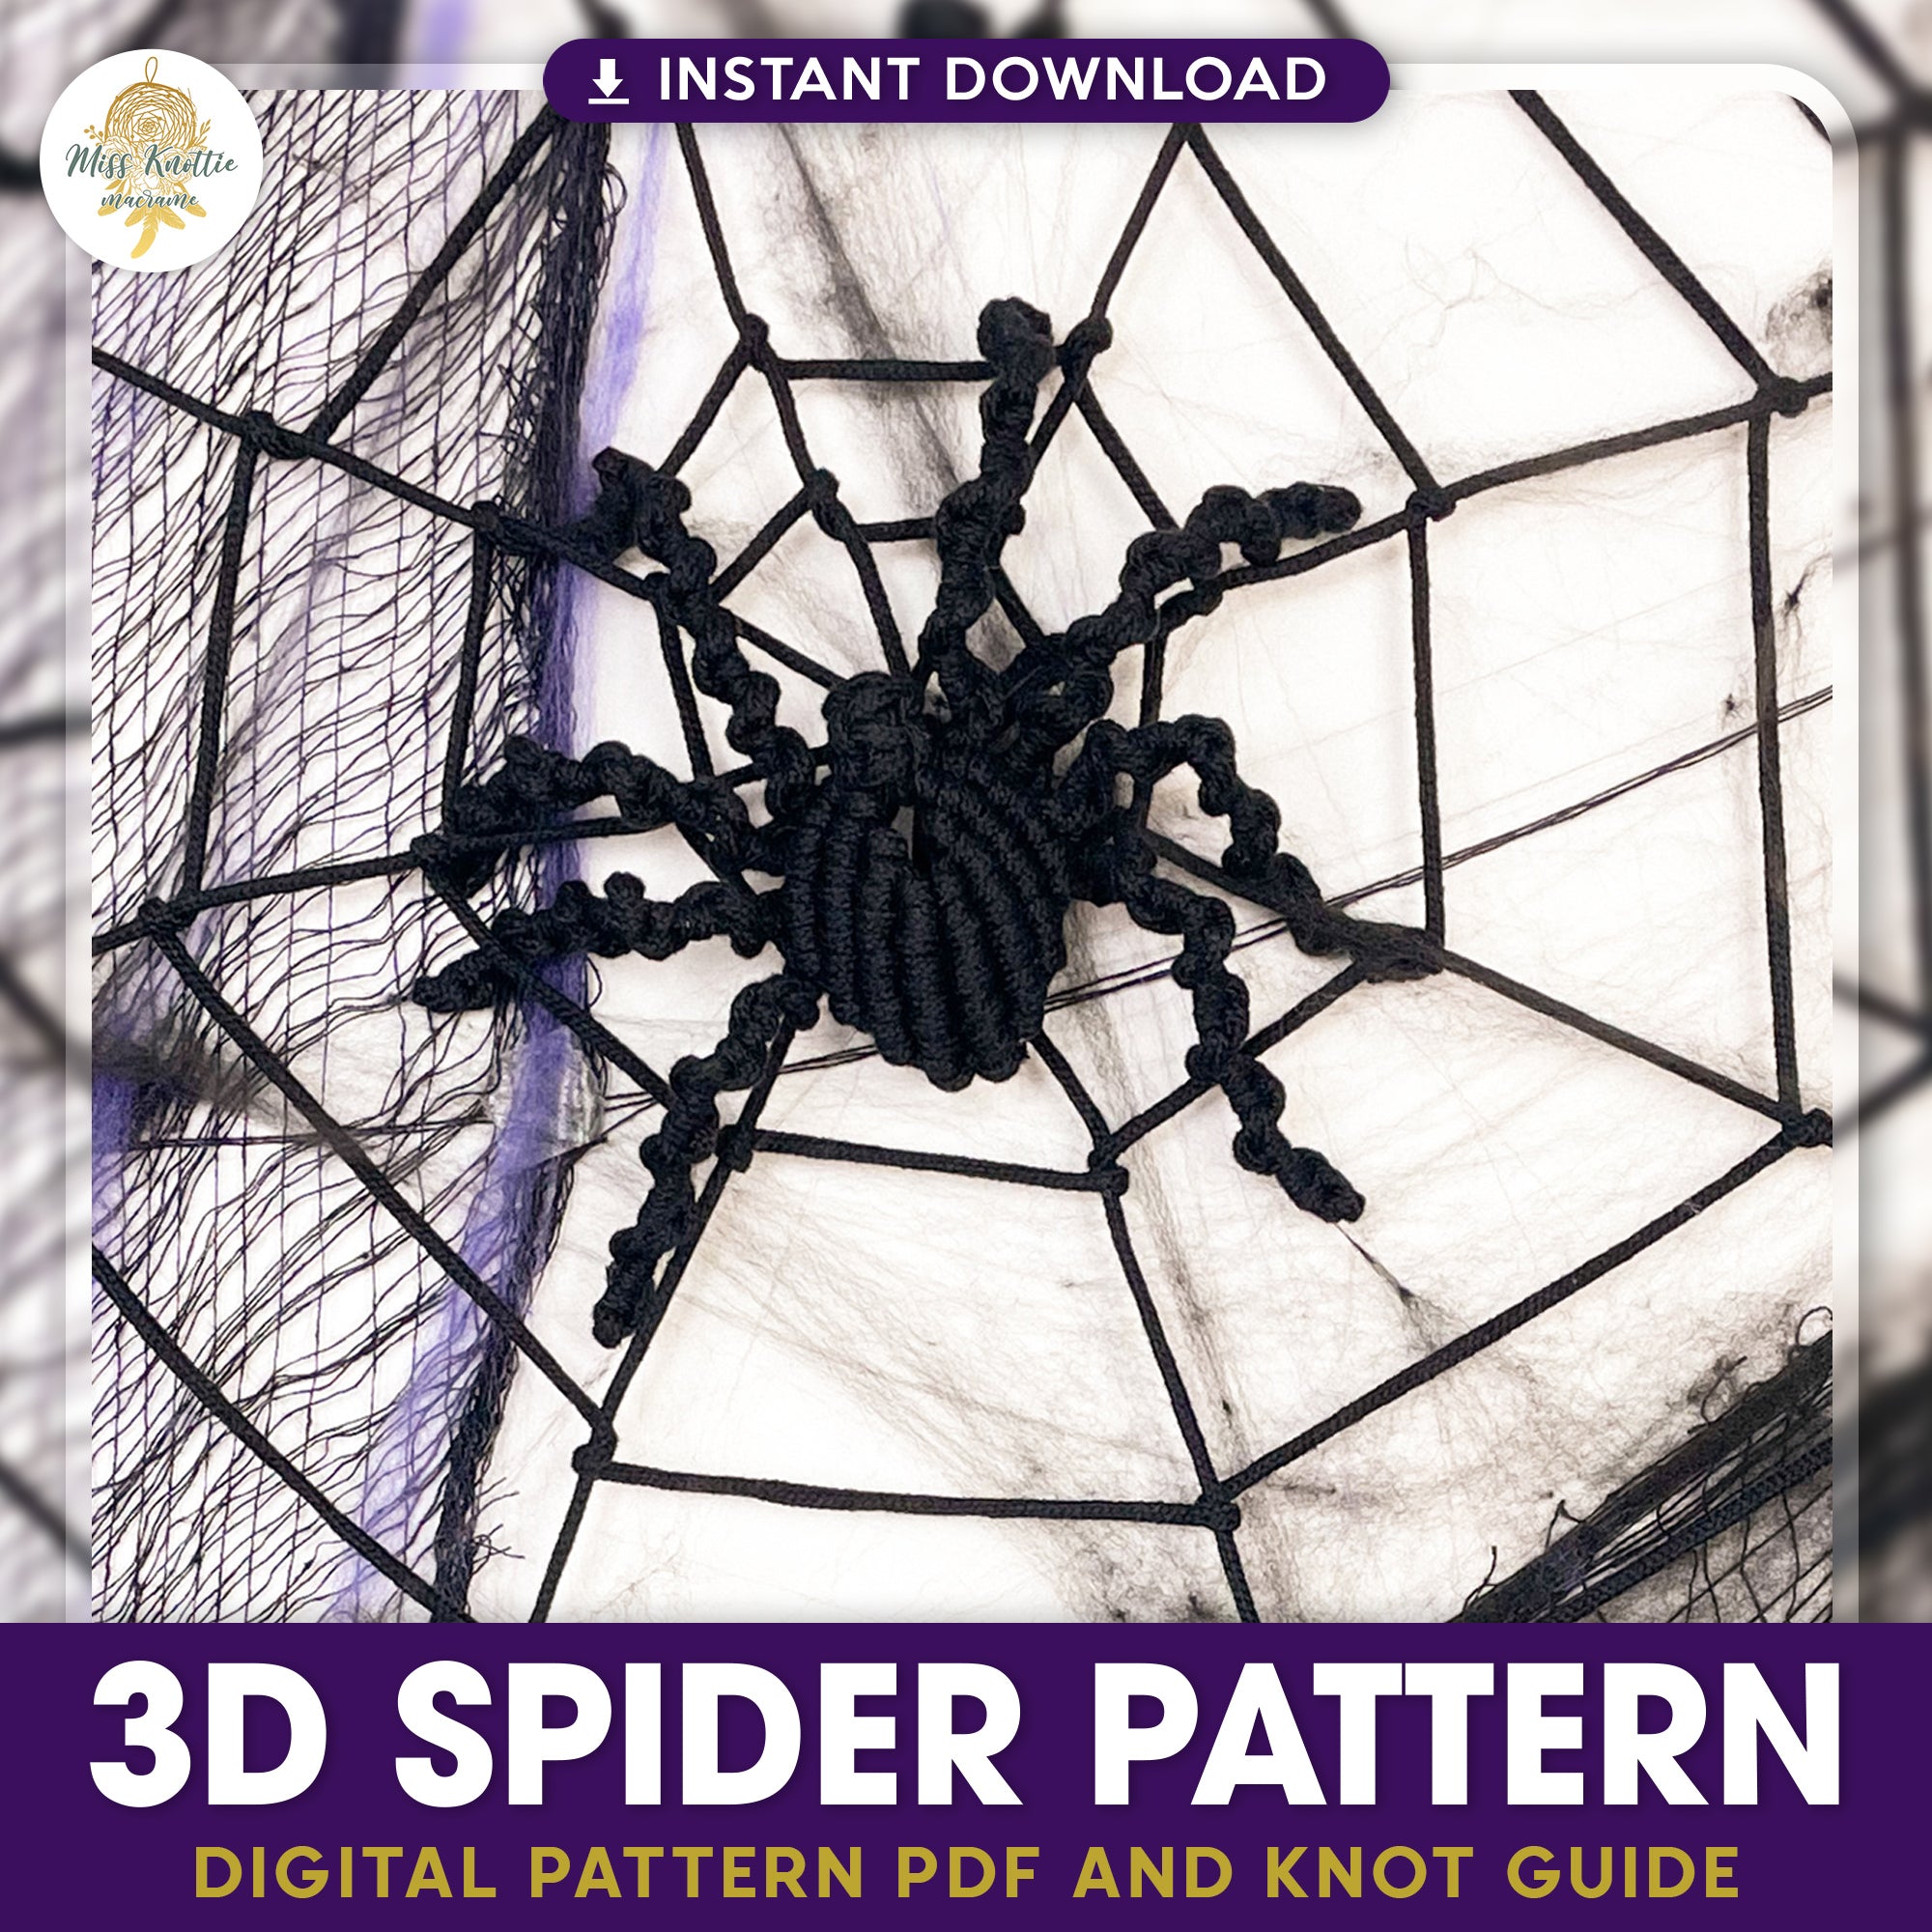 3D Spider Pattern - Halloween Knot Pattern - Digital PDF and Knot Guide